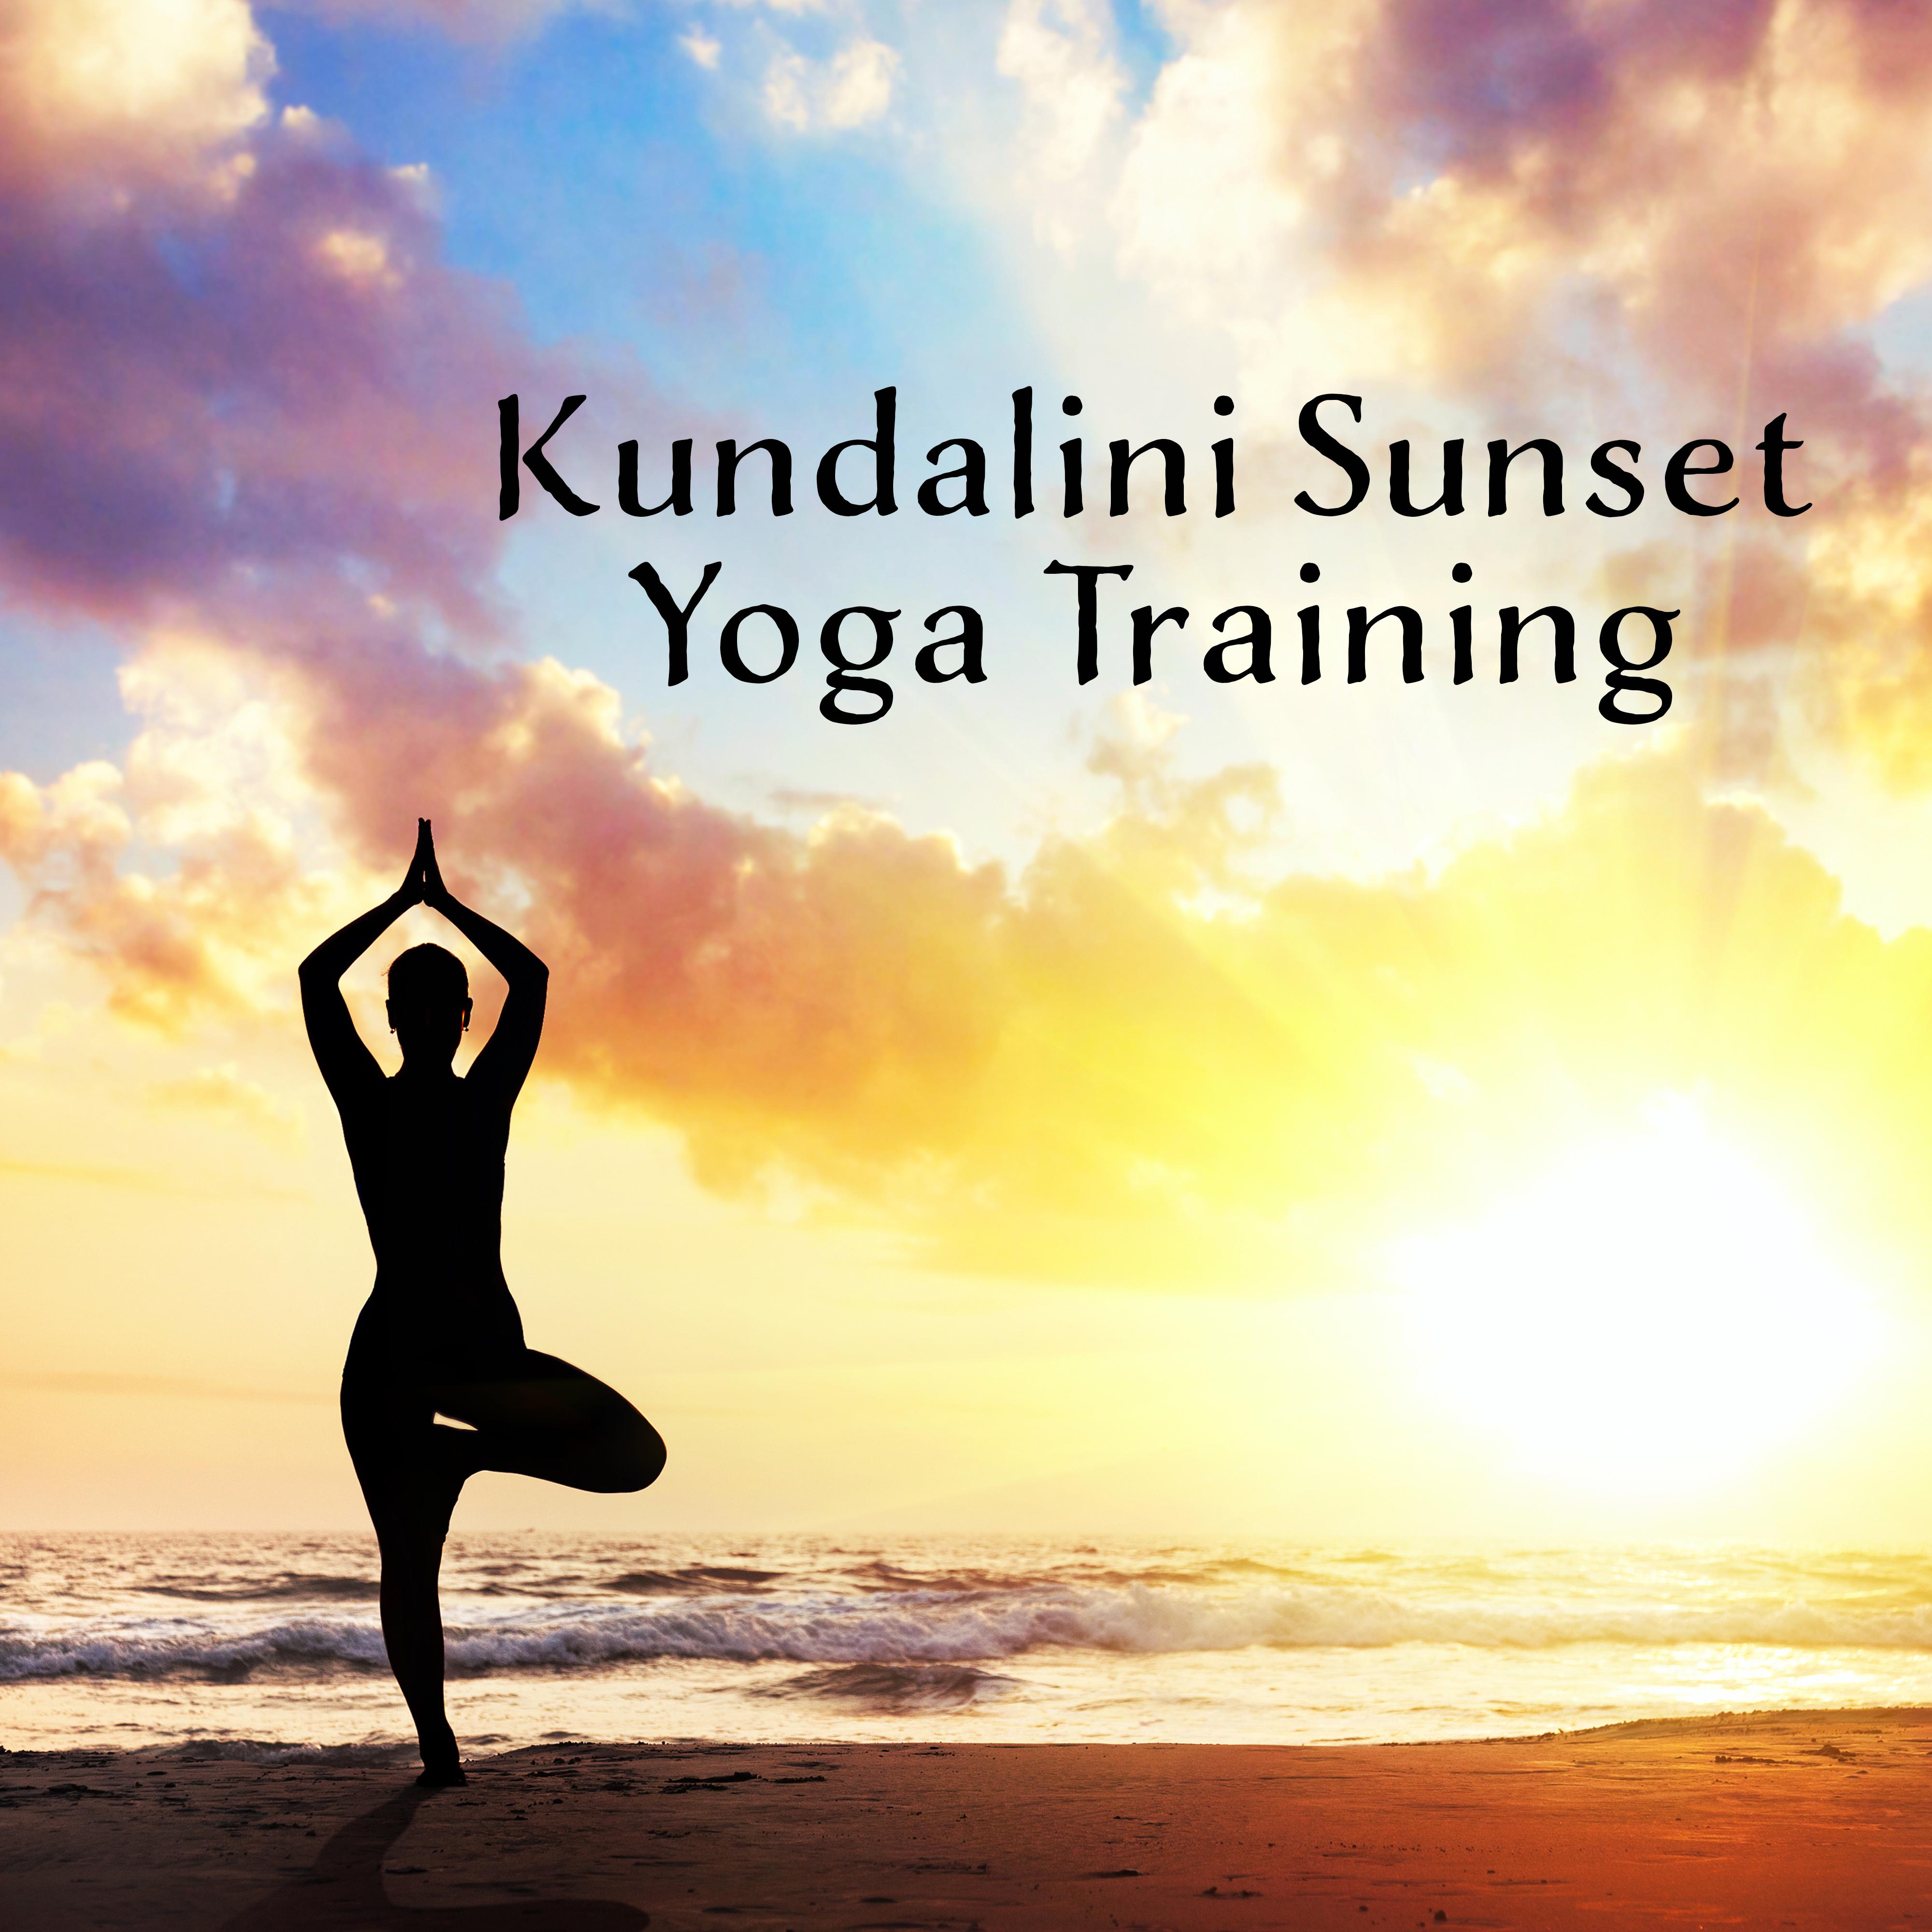 Kundalini Sunset Yoga Training: 2019 New Age Music with Ambient Deep Melodies for Pure Mindfulness Meditation & Inner Relaxation